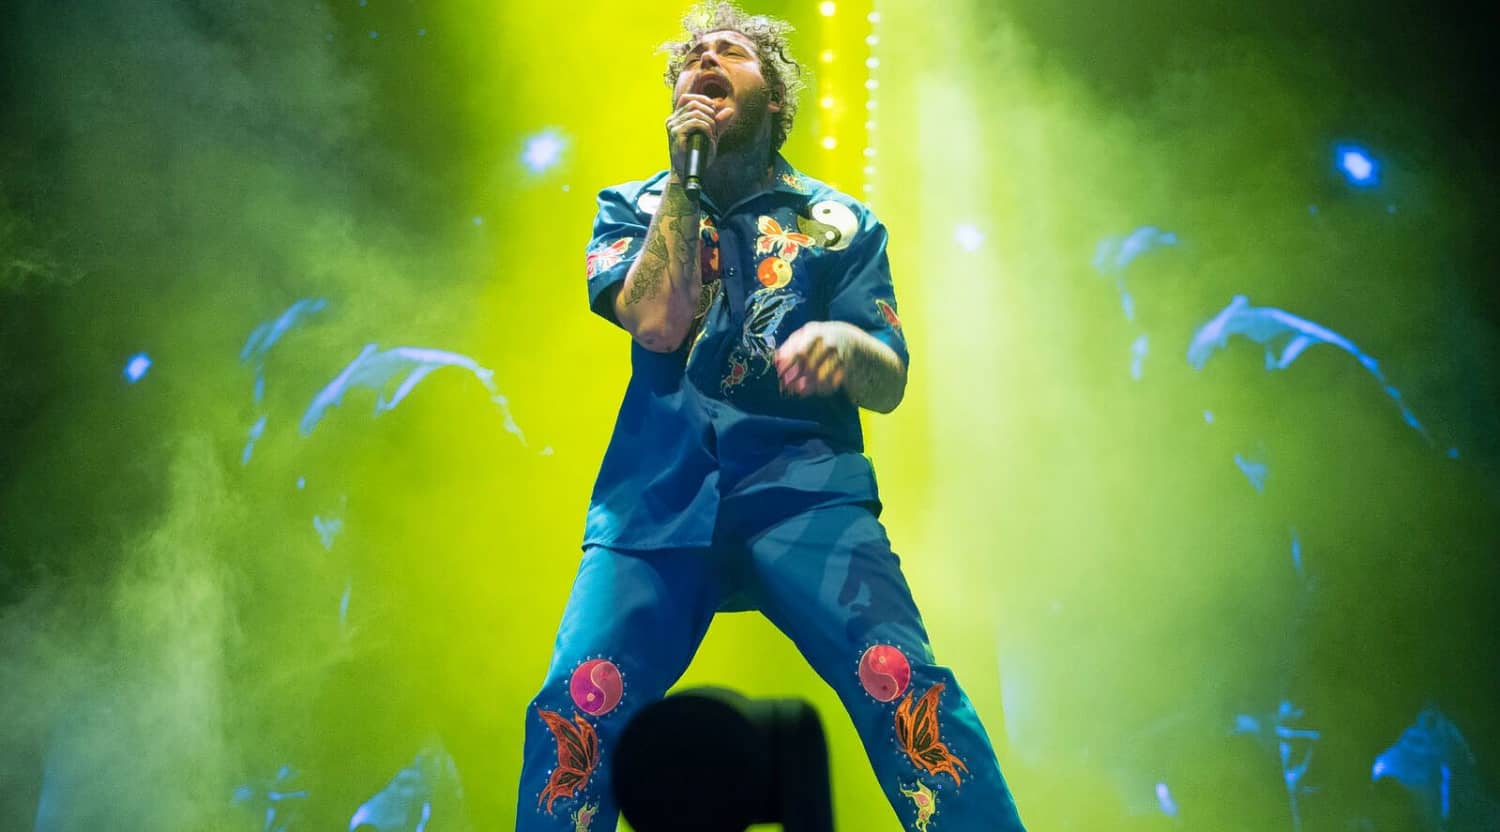 Post Malone Tickets - Post Malone Concert Tickets and Tour Dates - StubHub